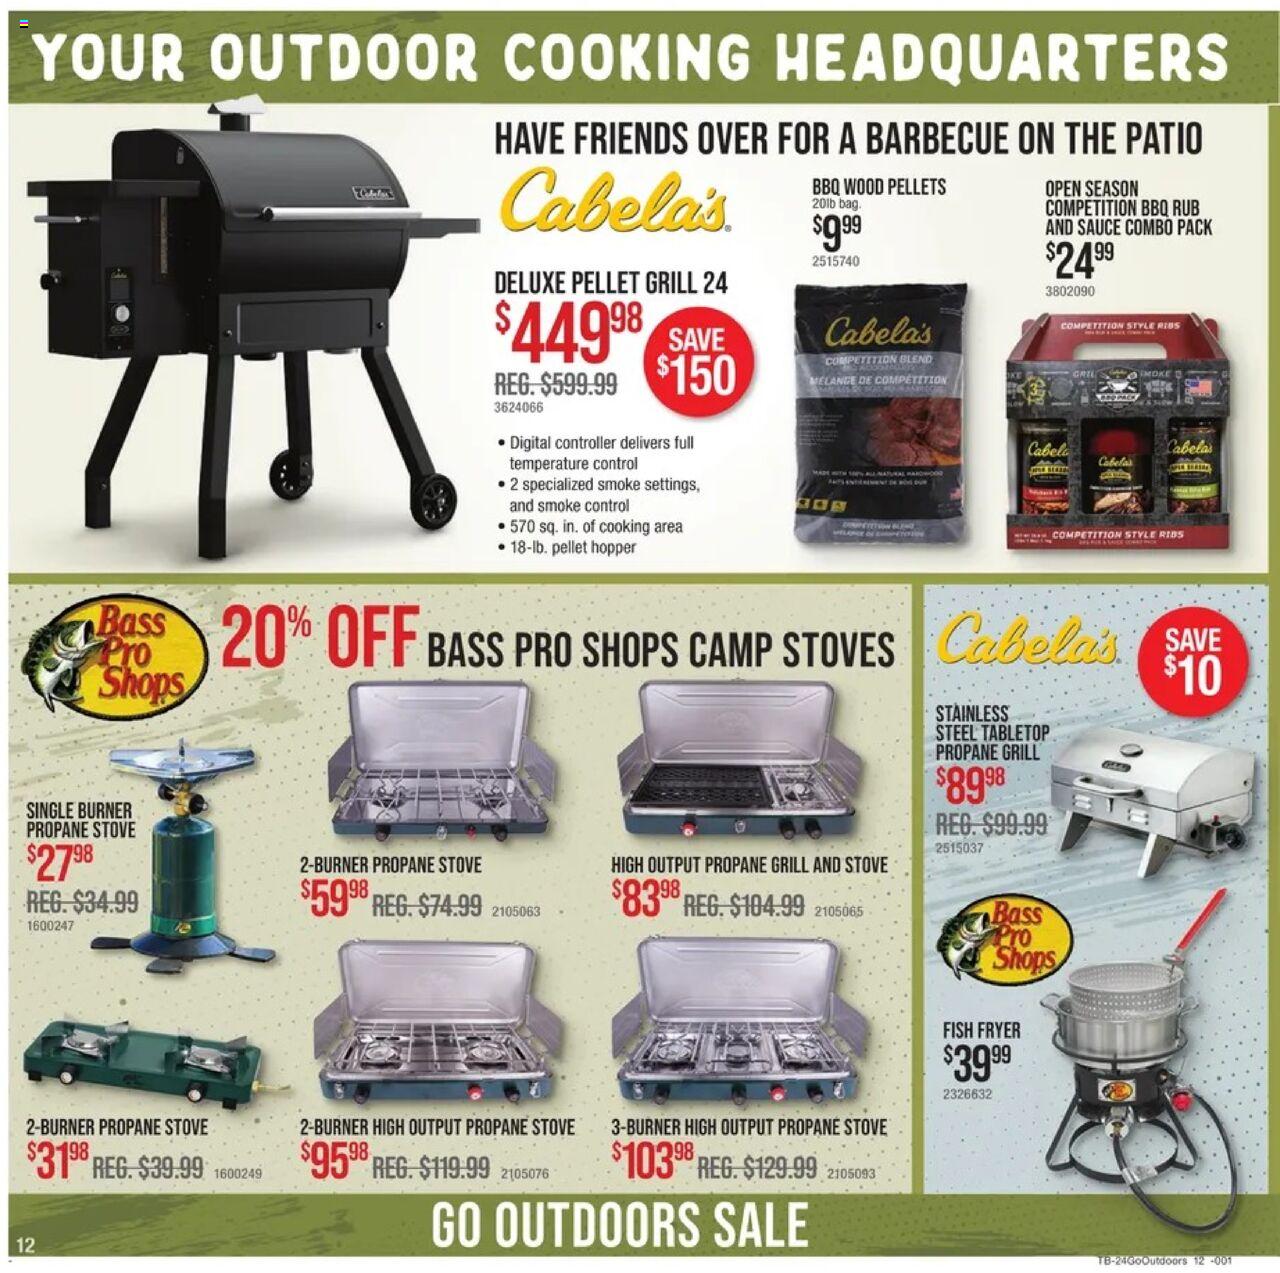 Bass Pro Shops - Flyer Specials - Page 12